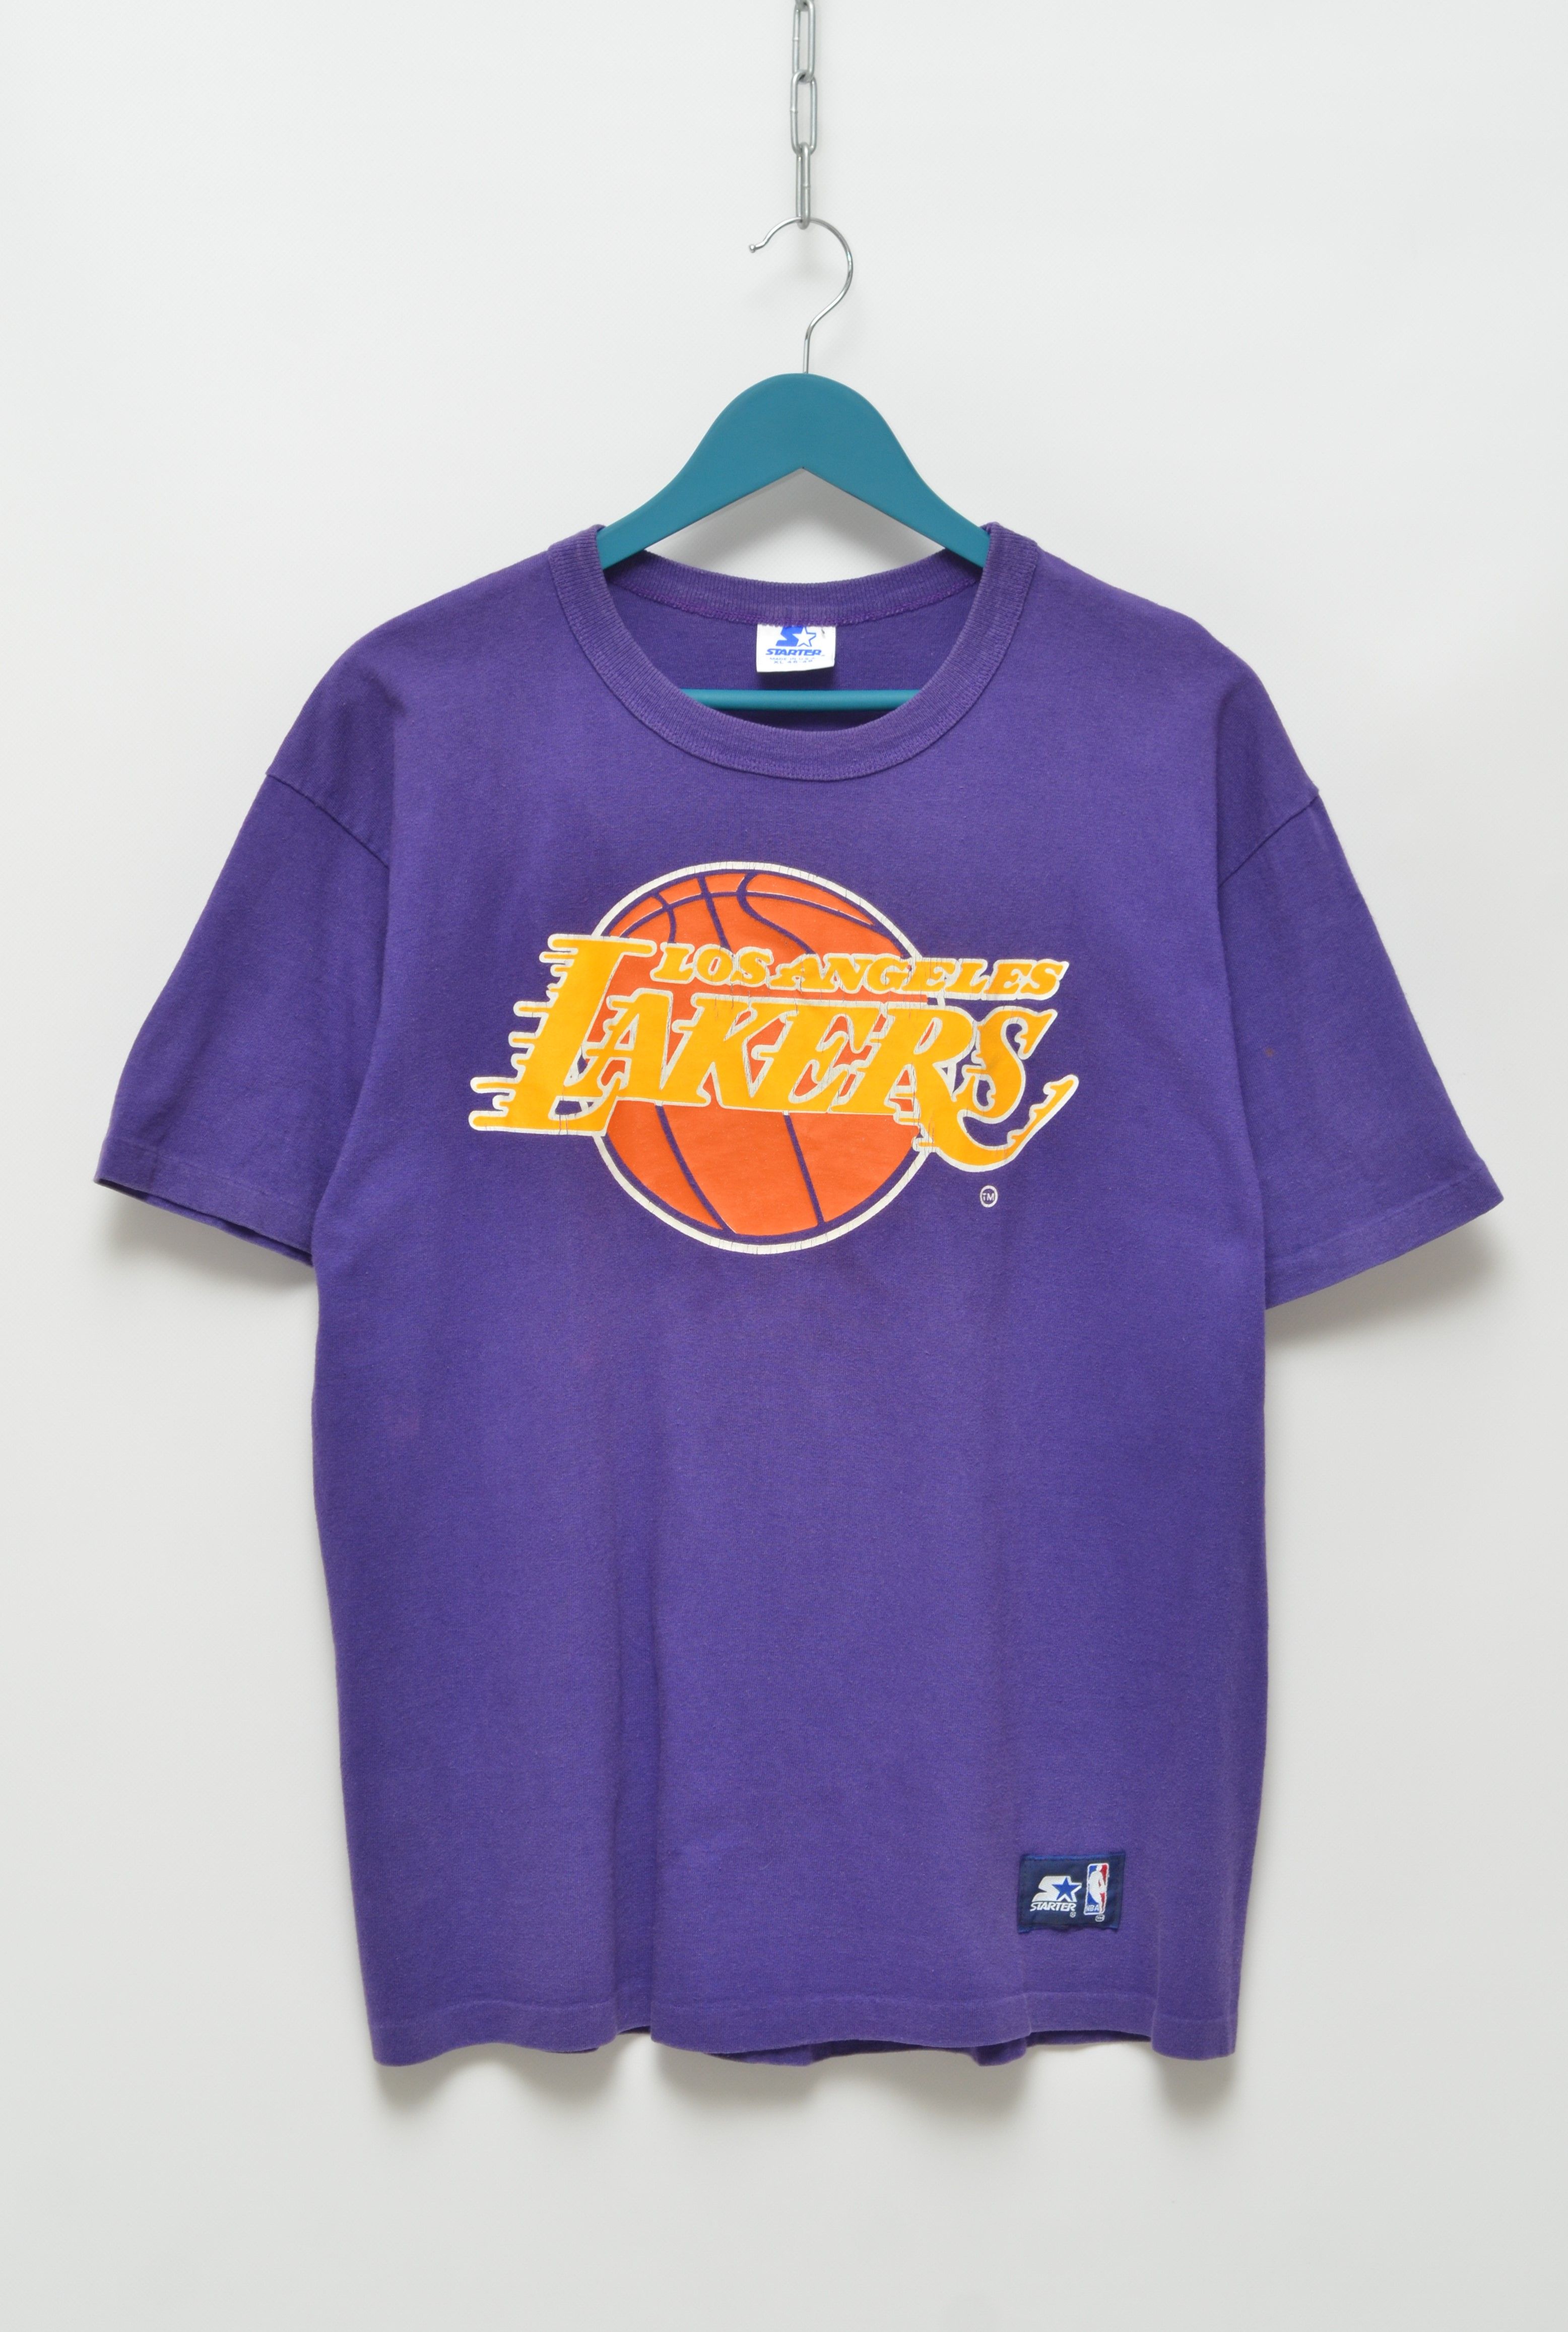 VINTAGE STARTER NBA LOS ANGELES LAKERS TEE SHIRT SIZE LARGE MADE IN USA